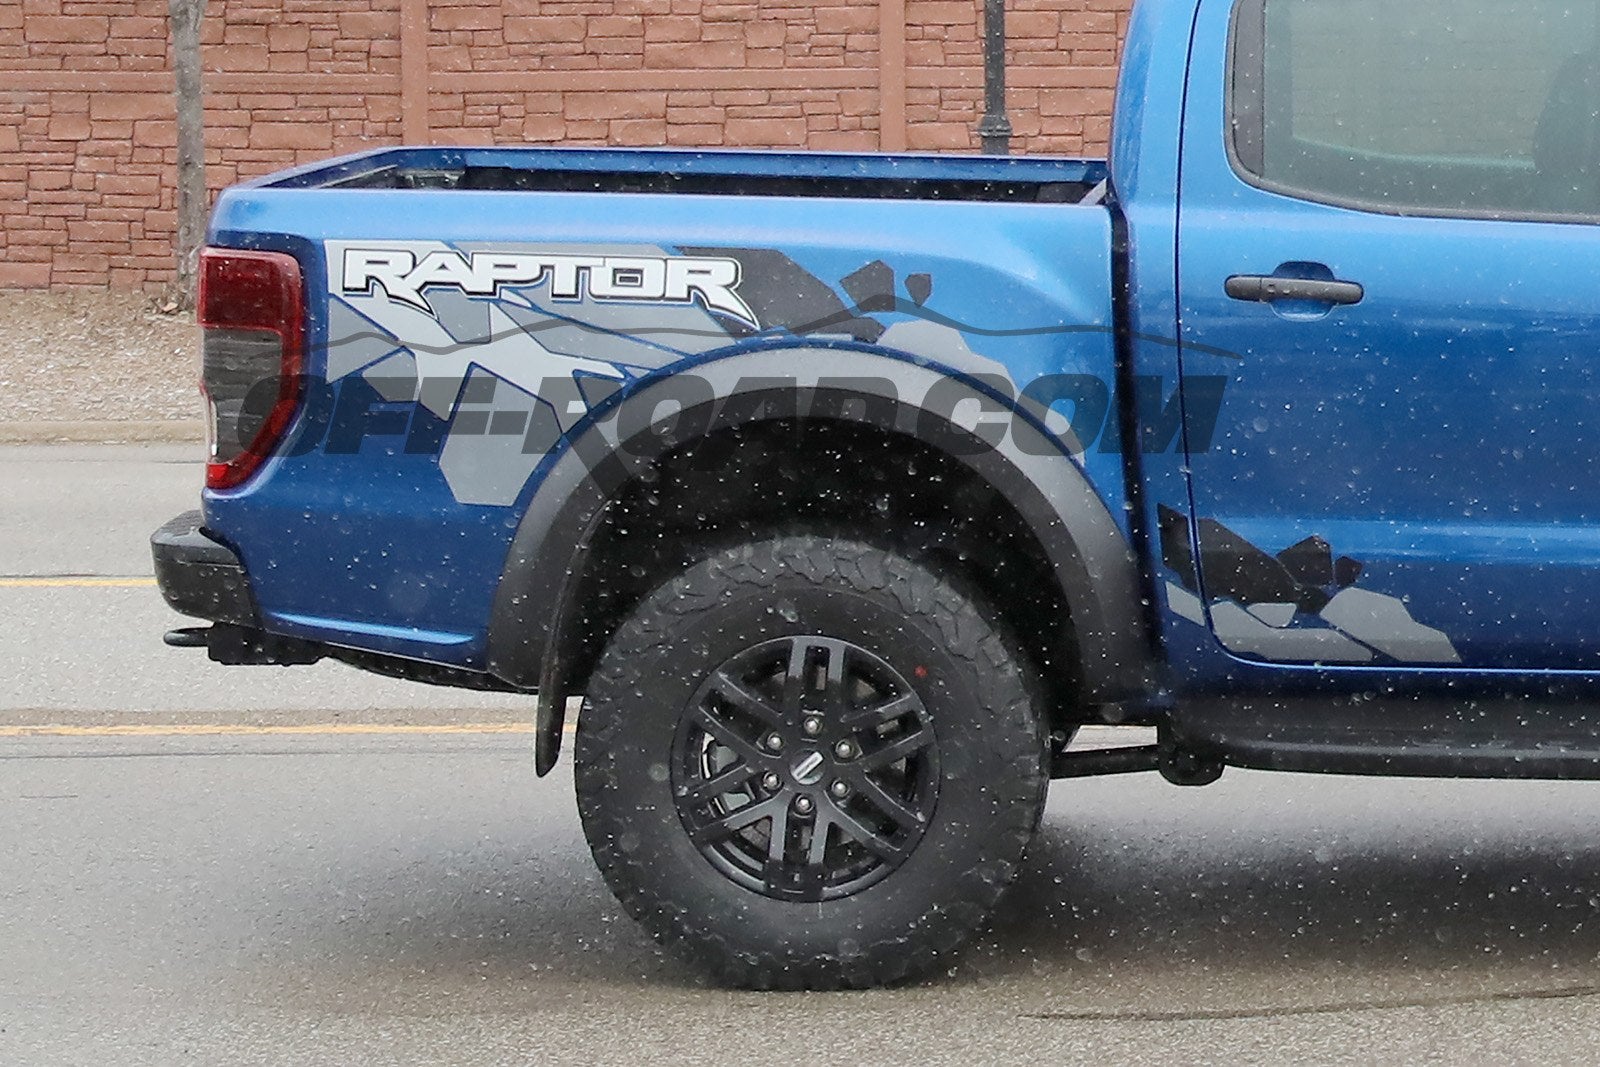 Ford Ranger Raptor Spotted Testing on Michigan Streets ...